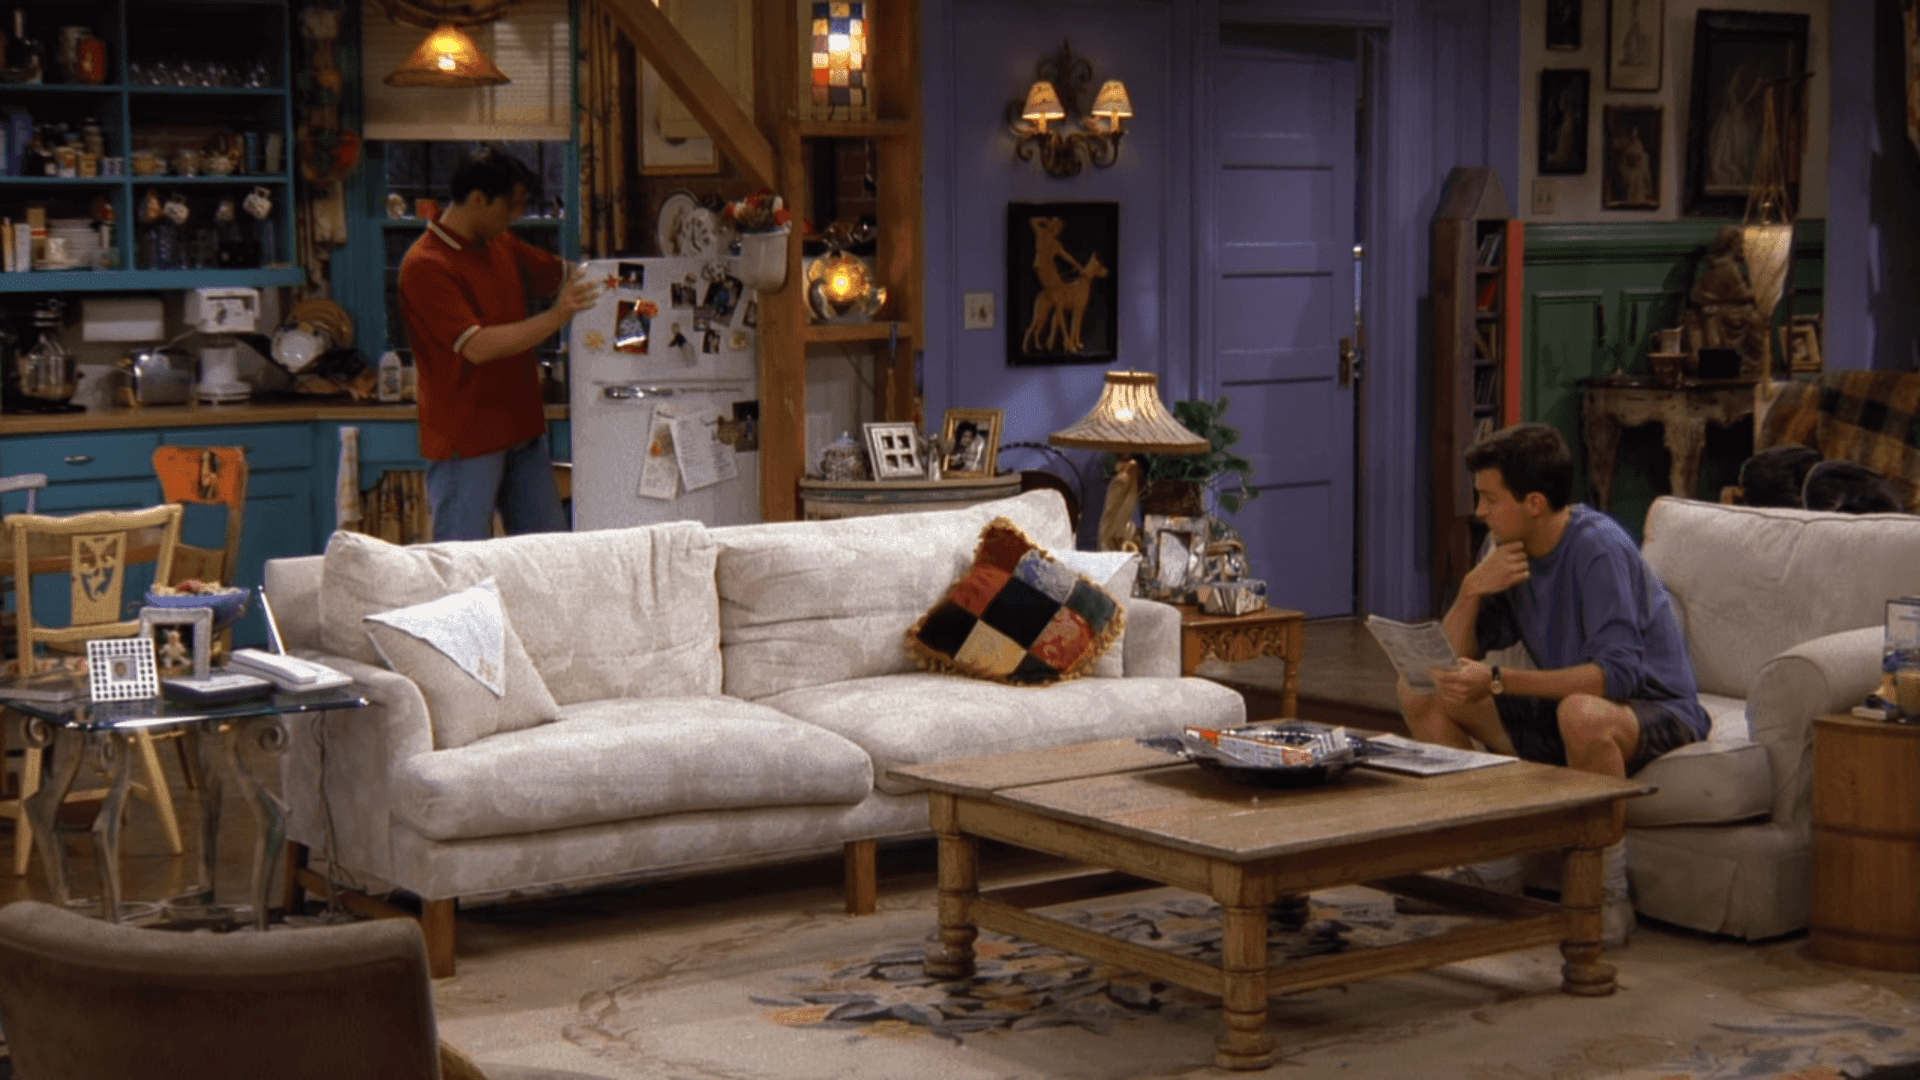 The Friends living room has more than 4 coffee tables that don't match.